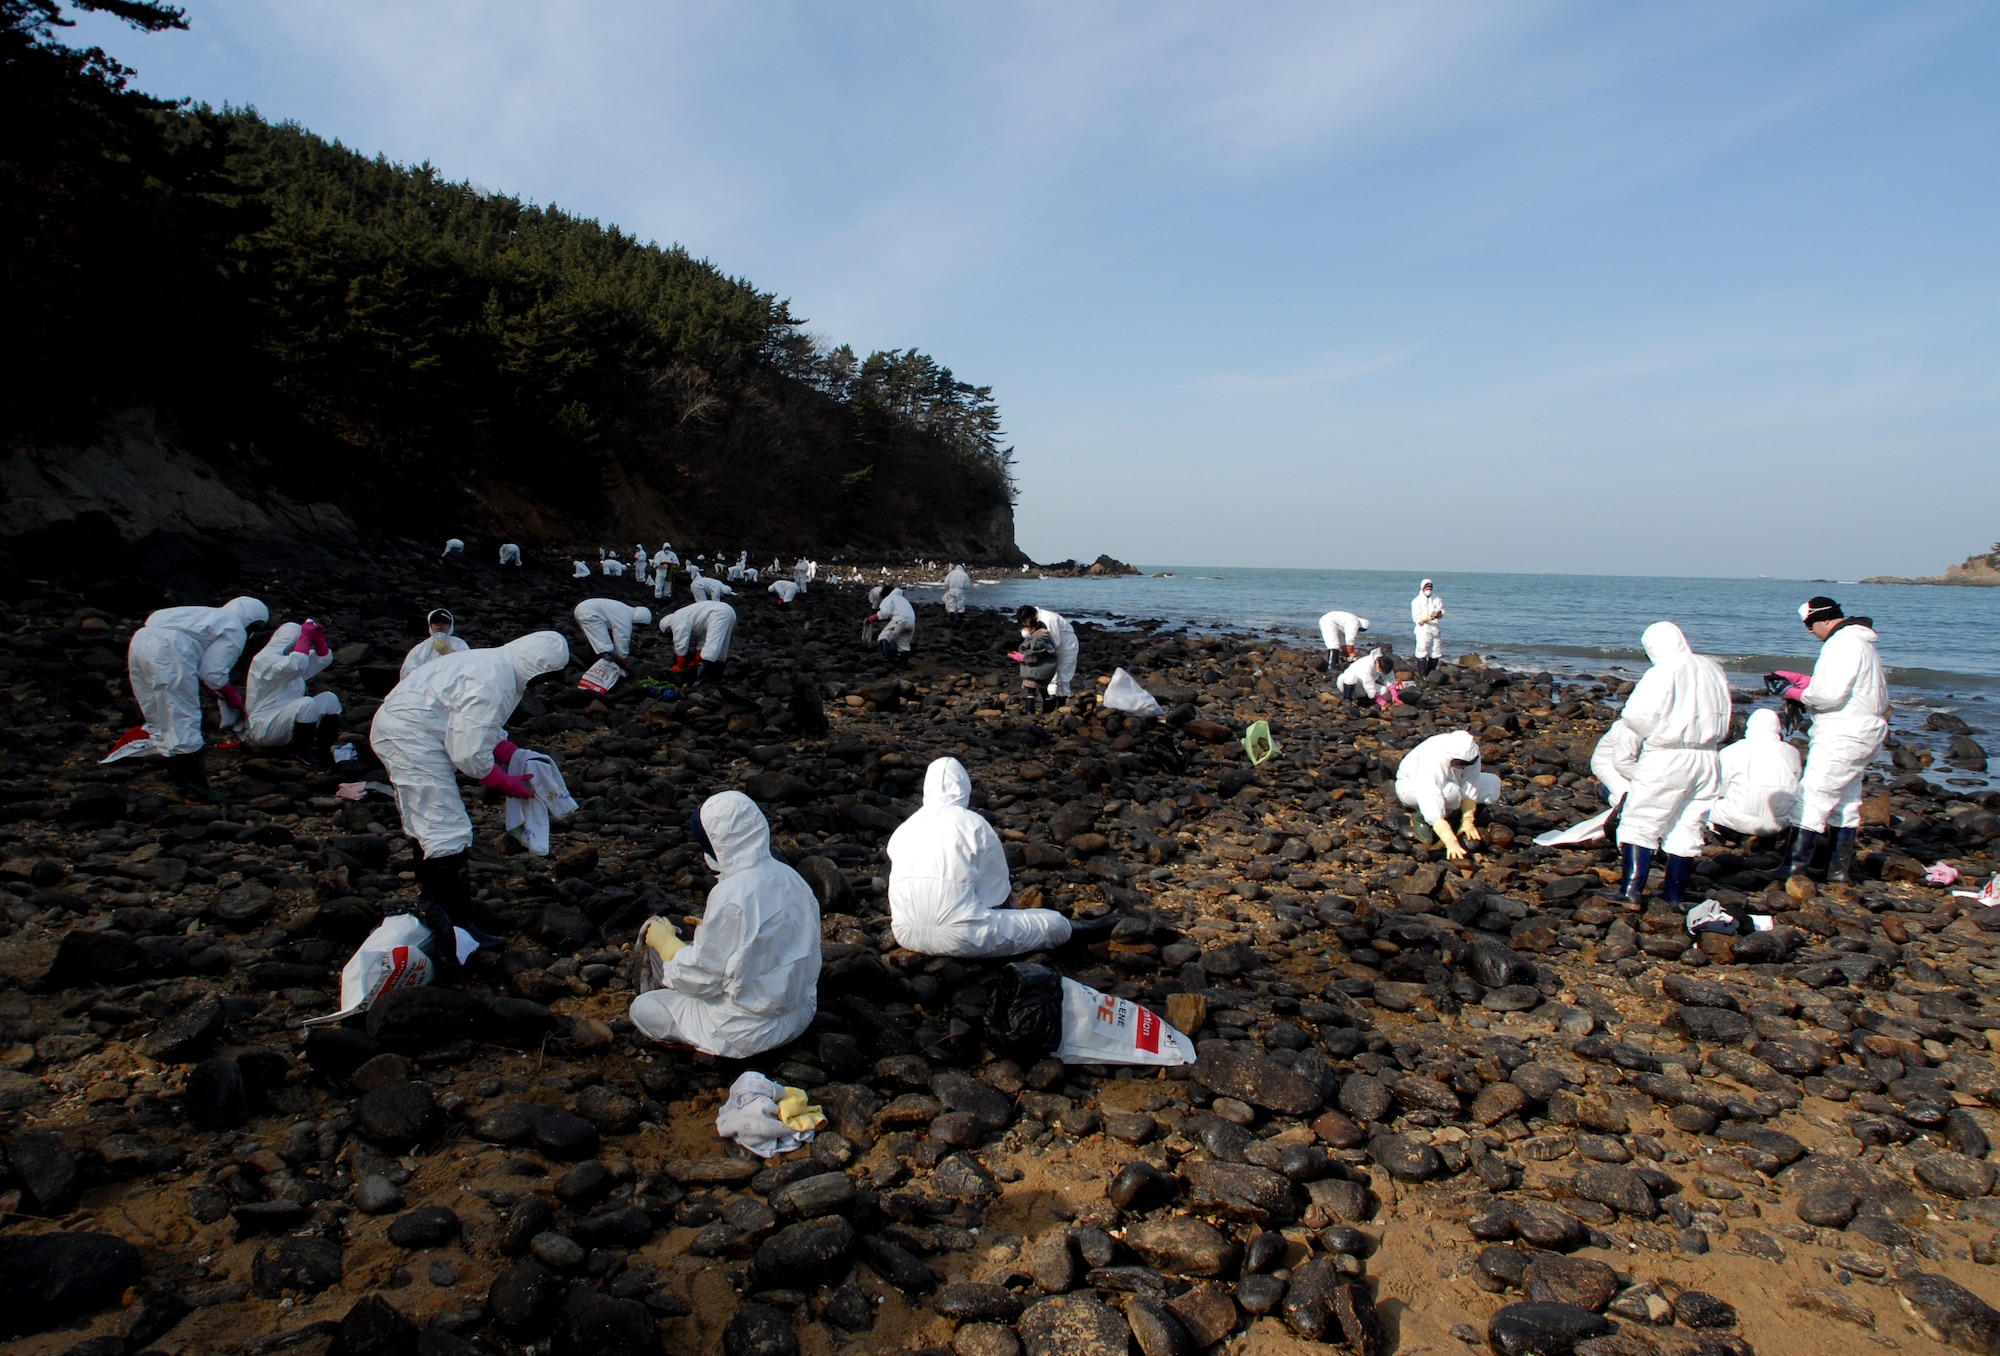 MALLIPO BEACH, South Korea -- Airmen and Soldiers from Kunsan Air Base along with Korean nationals clean rocks after crude oil spilled from a crane barge December 7, 2007 and washed ashore here. Over 200,000 volunteers assisted with the clean up of 2.7 million gallons of oil.  Several agencies, to include 13 helicopters, 17 airplanes, 327 vessels and United States Air Force, Army personnel and Korean nationals took part in the clean up efforts. (U.S. Air Force photo/Senior Airman Steven R. Doty)